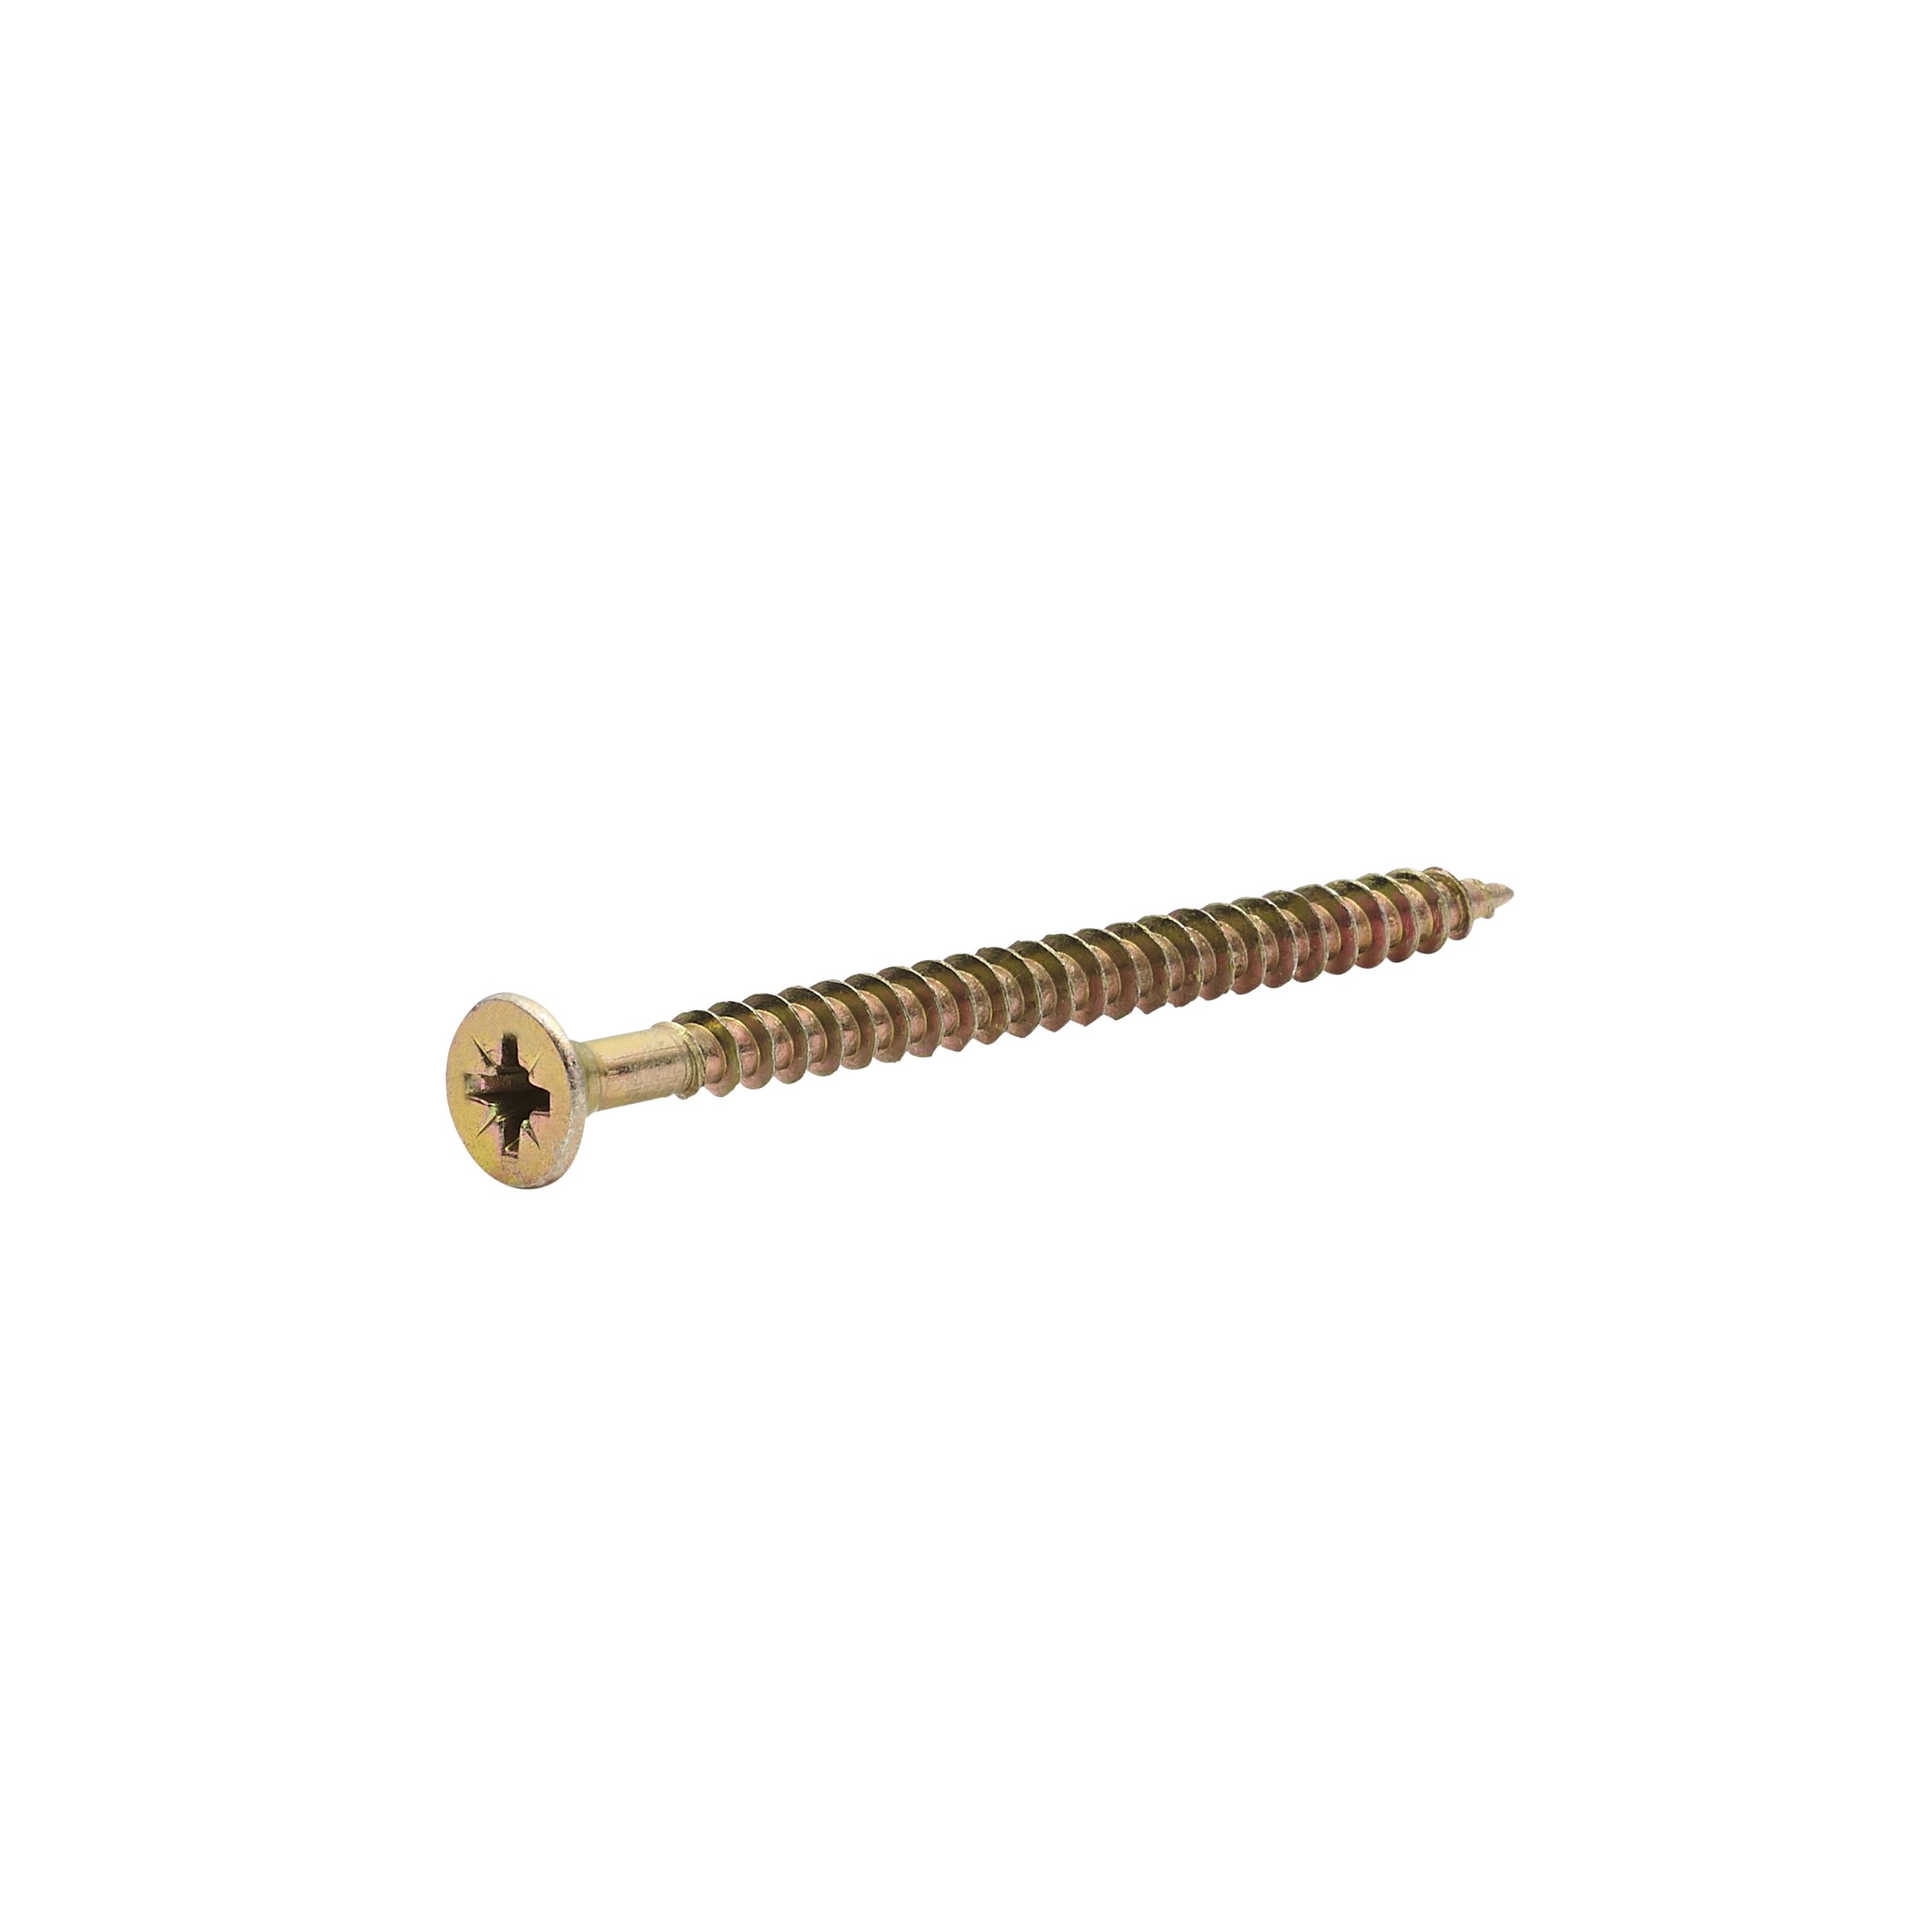 Diall Yellow-passivated Carbon steel Screw (Dia)5mm (L)70mm, Pack of 500